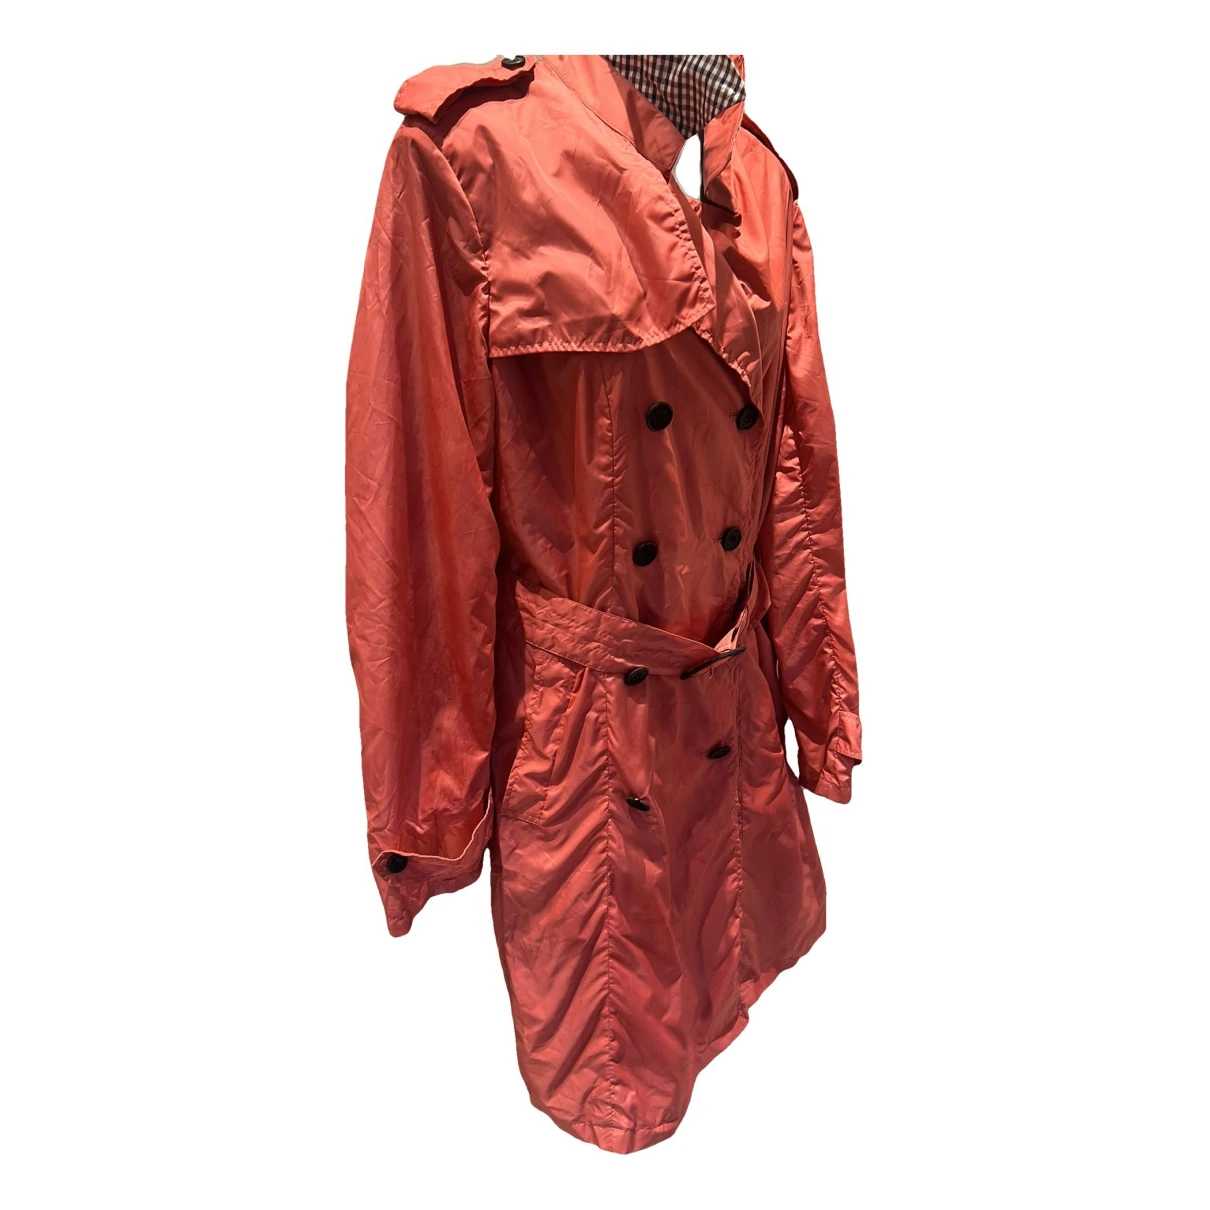 Pre-owned Aquascutum Trench Coat In Pink